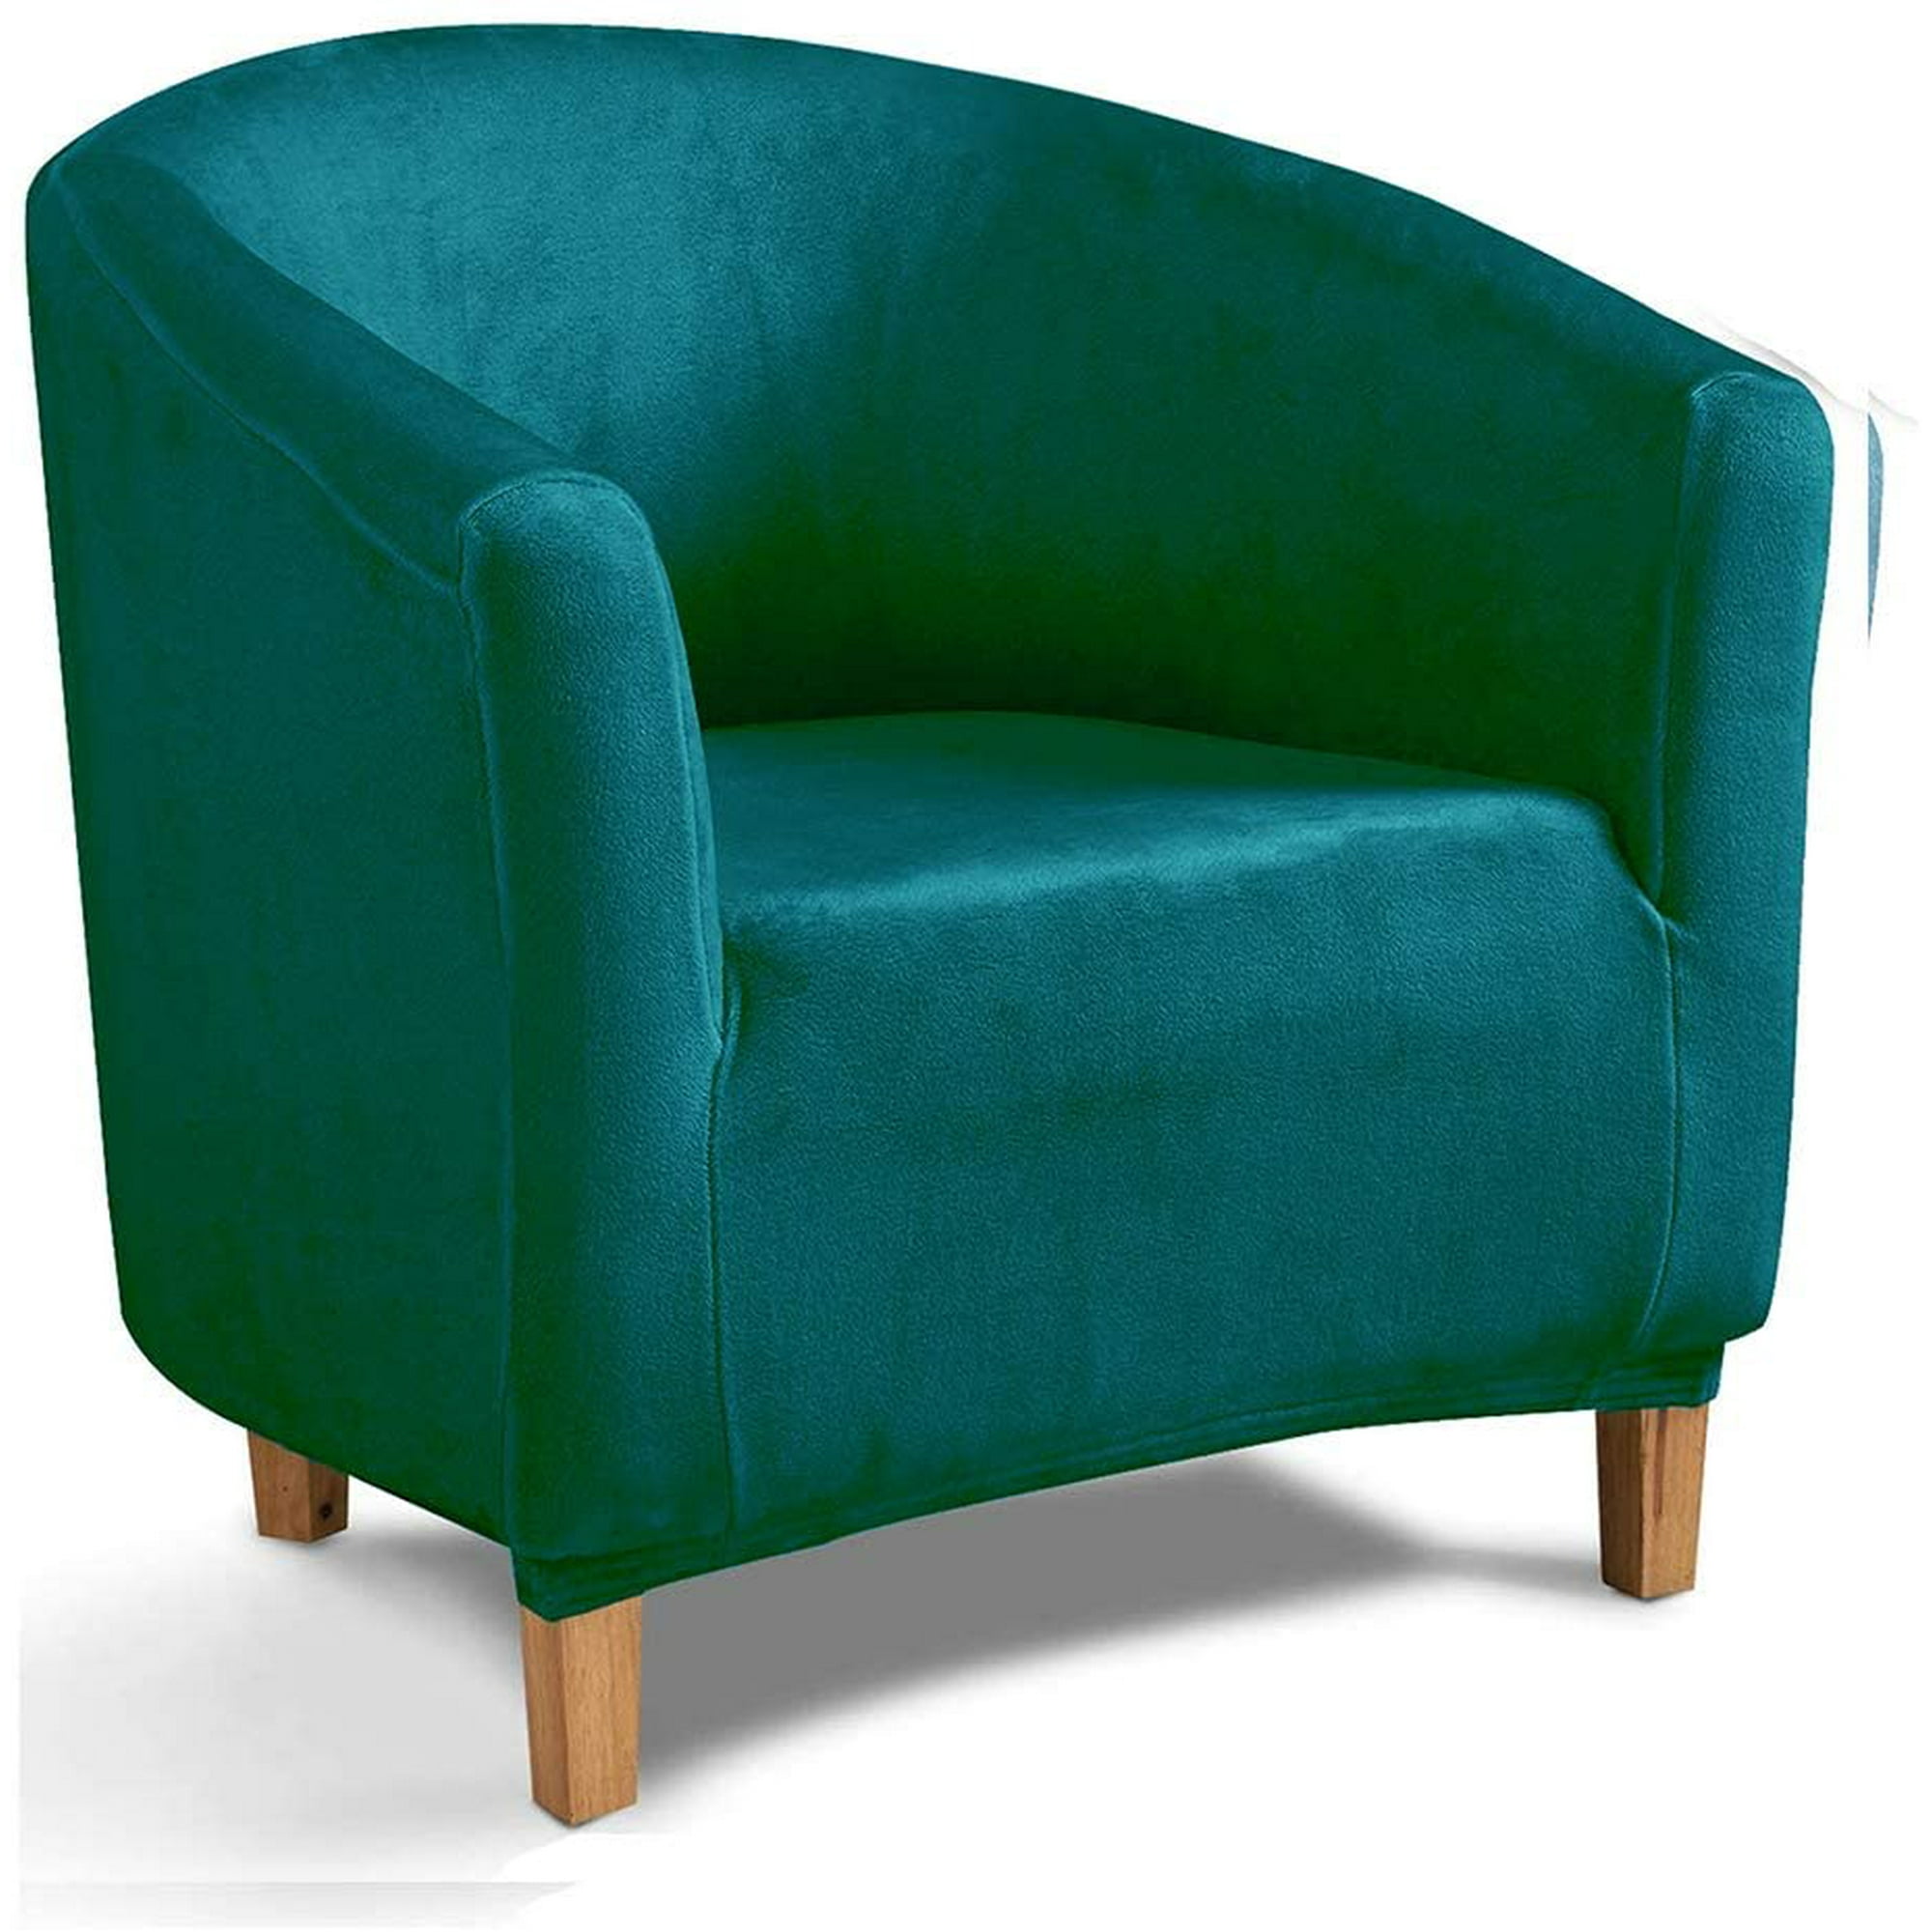 S Armchair Slipcovers Tub Chair Slipcover Furniture Protector Cover For Dining Living Room Office Reception Chair Cover Teal Walmart Canada